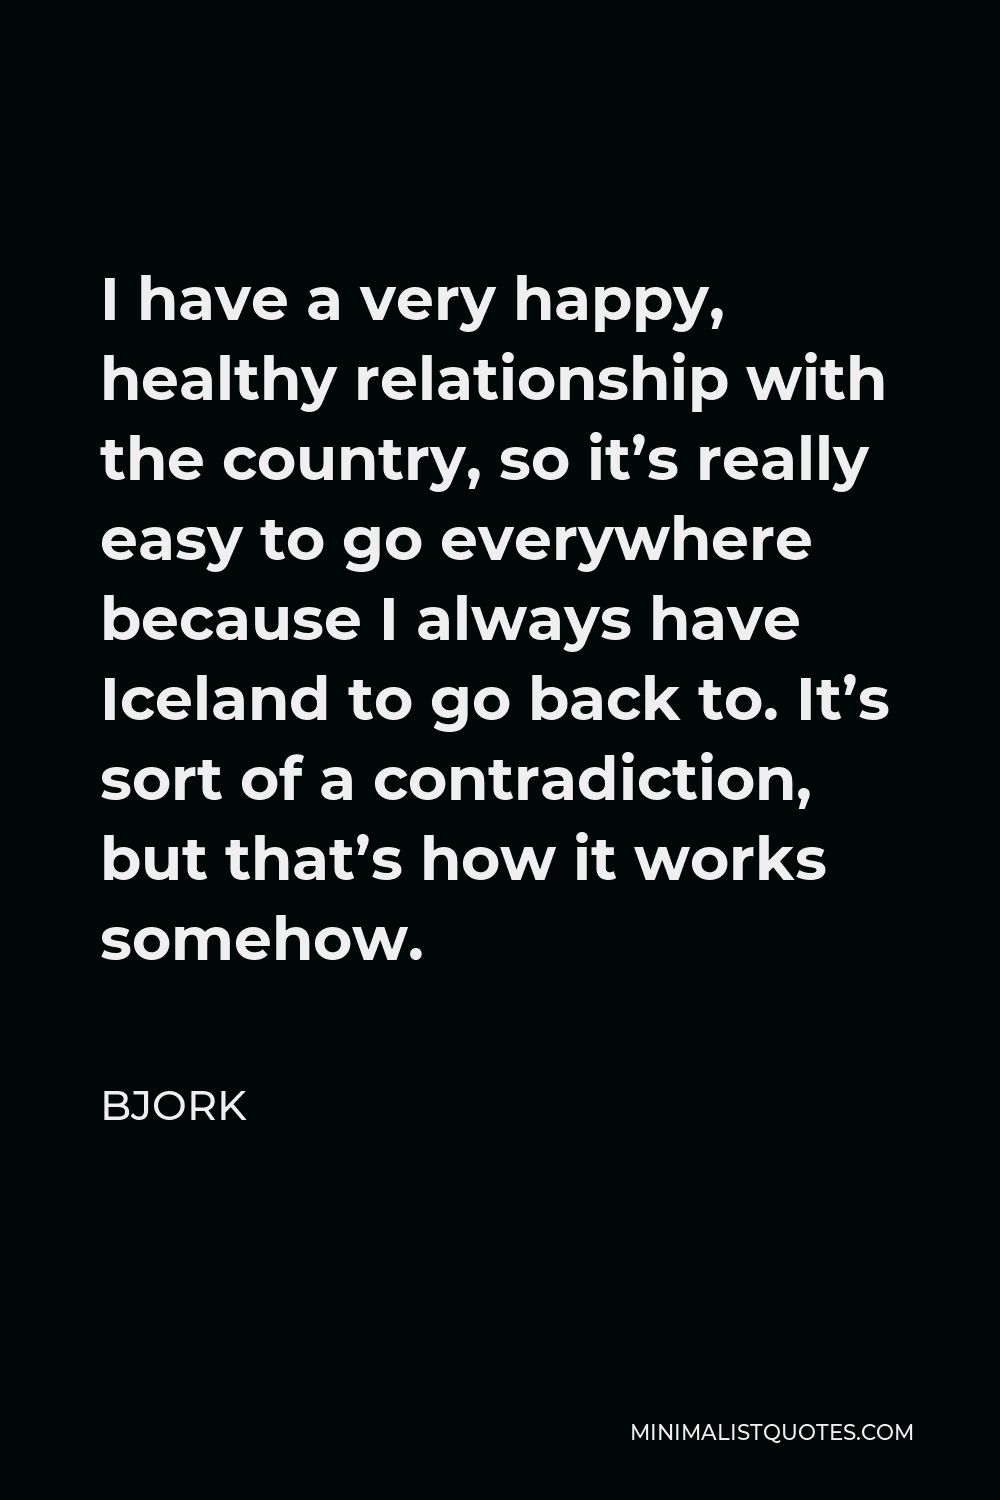 Bjork Quote - I have a very happy, healthy relationship with the country, so it’s really easy to go everywhere because I always have Iceland to go back to. It’s sort of a contradiction, but that’s how it works somehow.